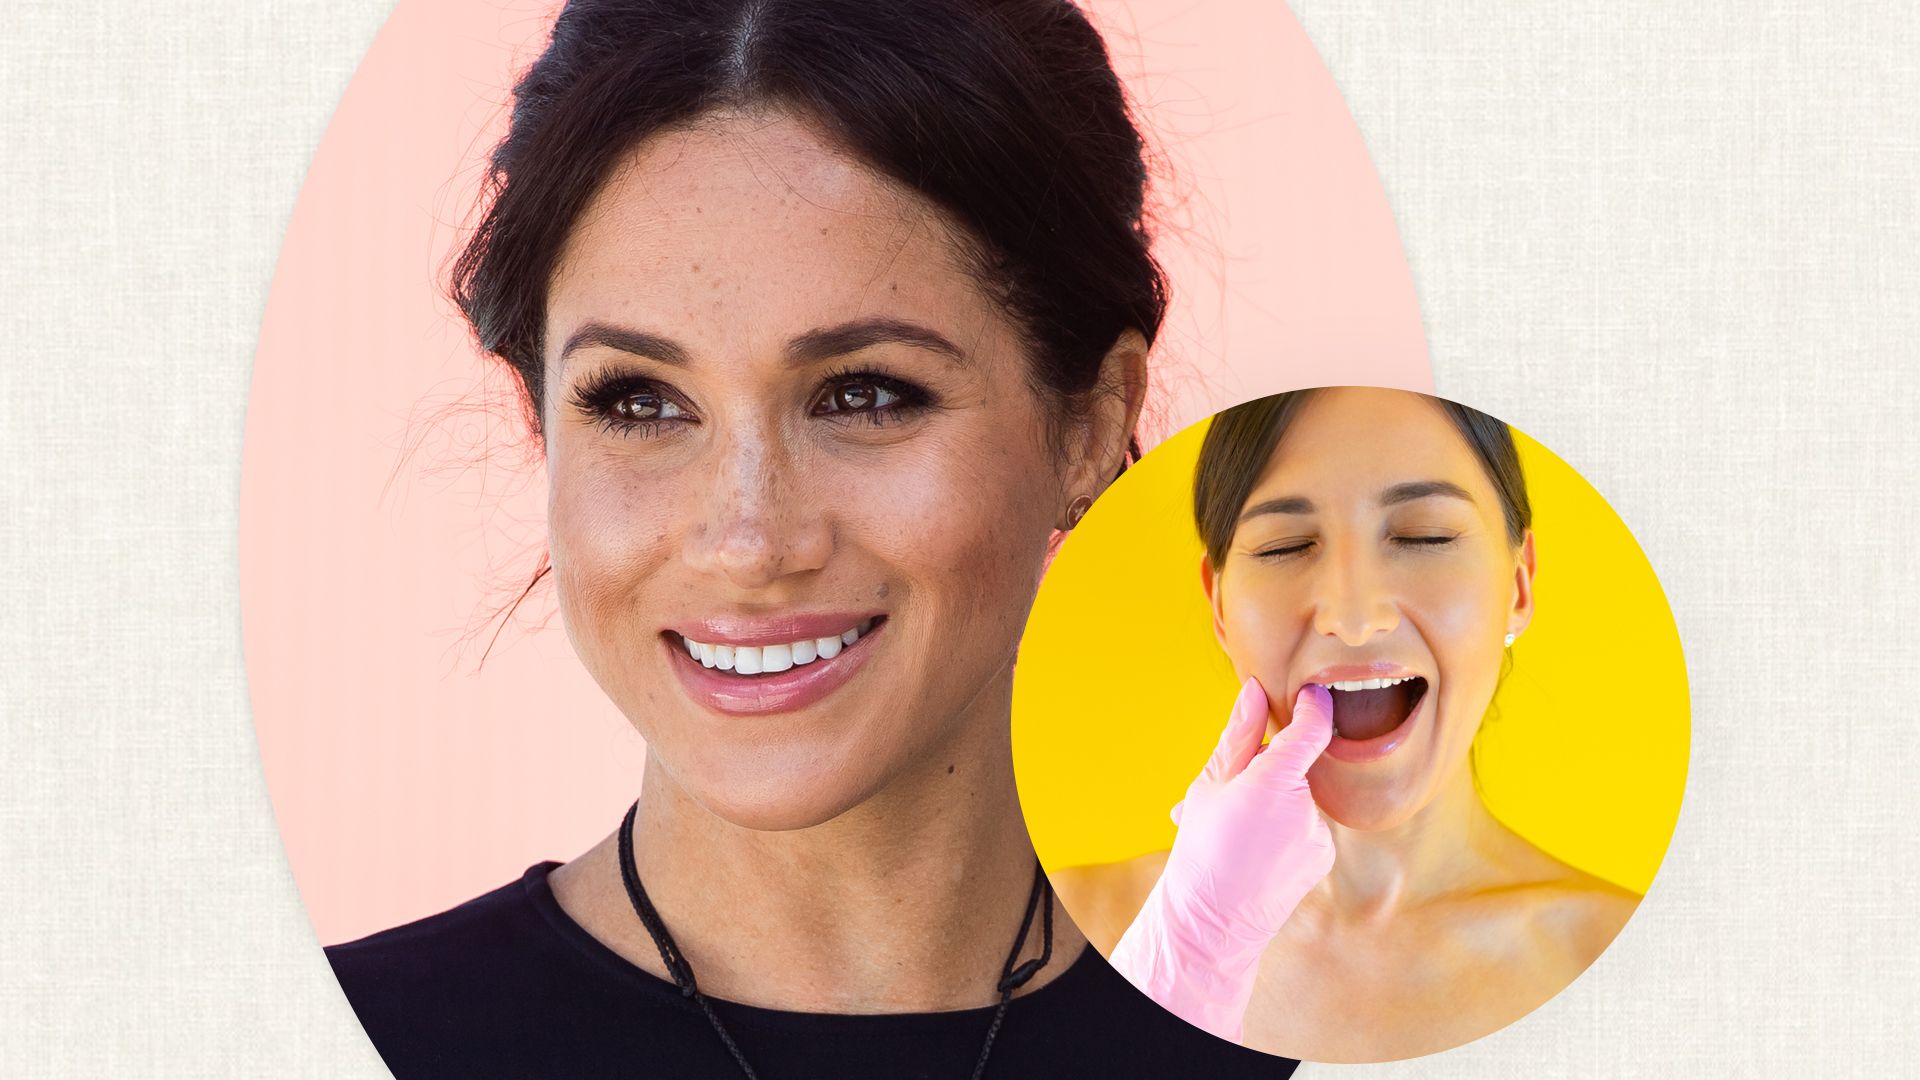 Meghan Markle smiling on a pink background and a woman doing a buccal massage